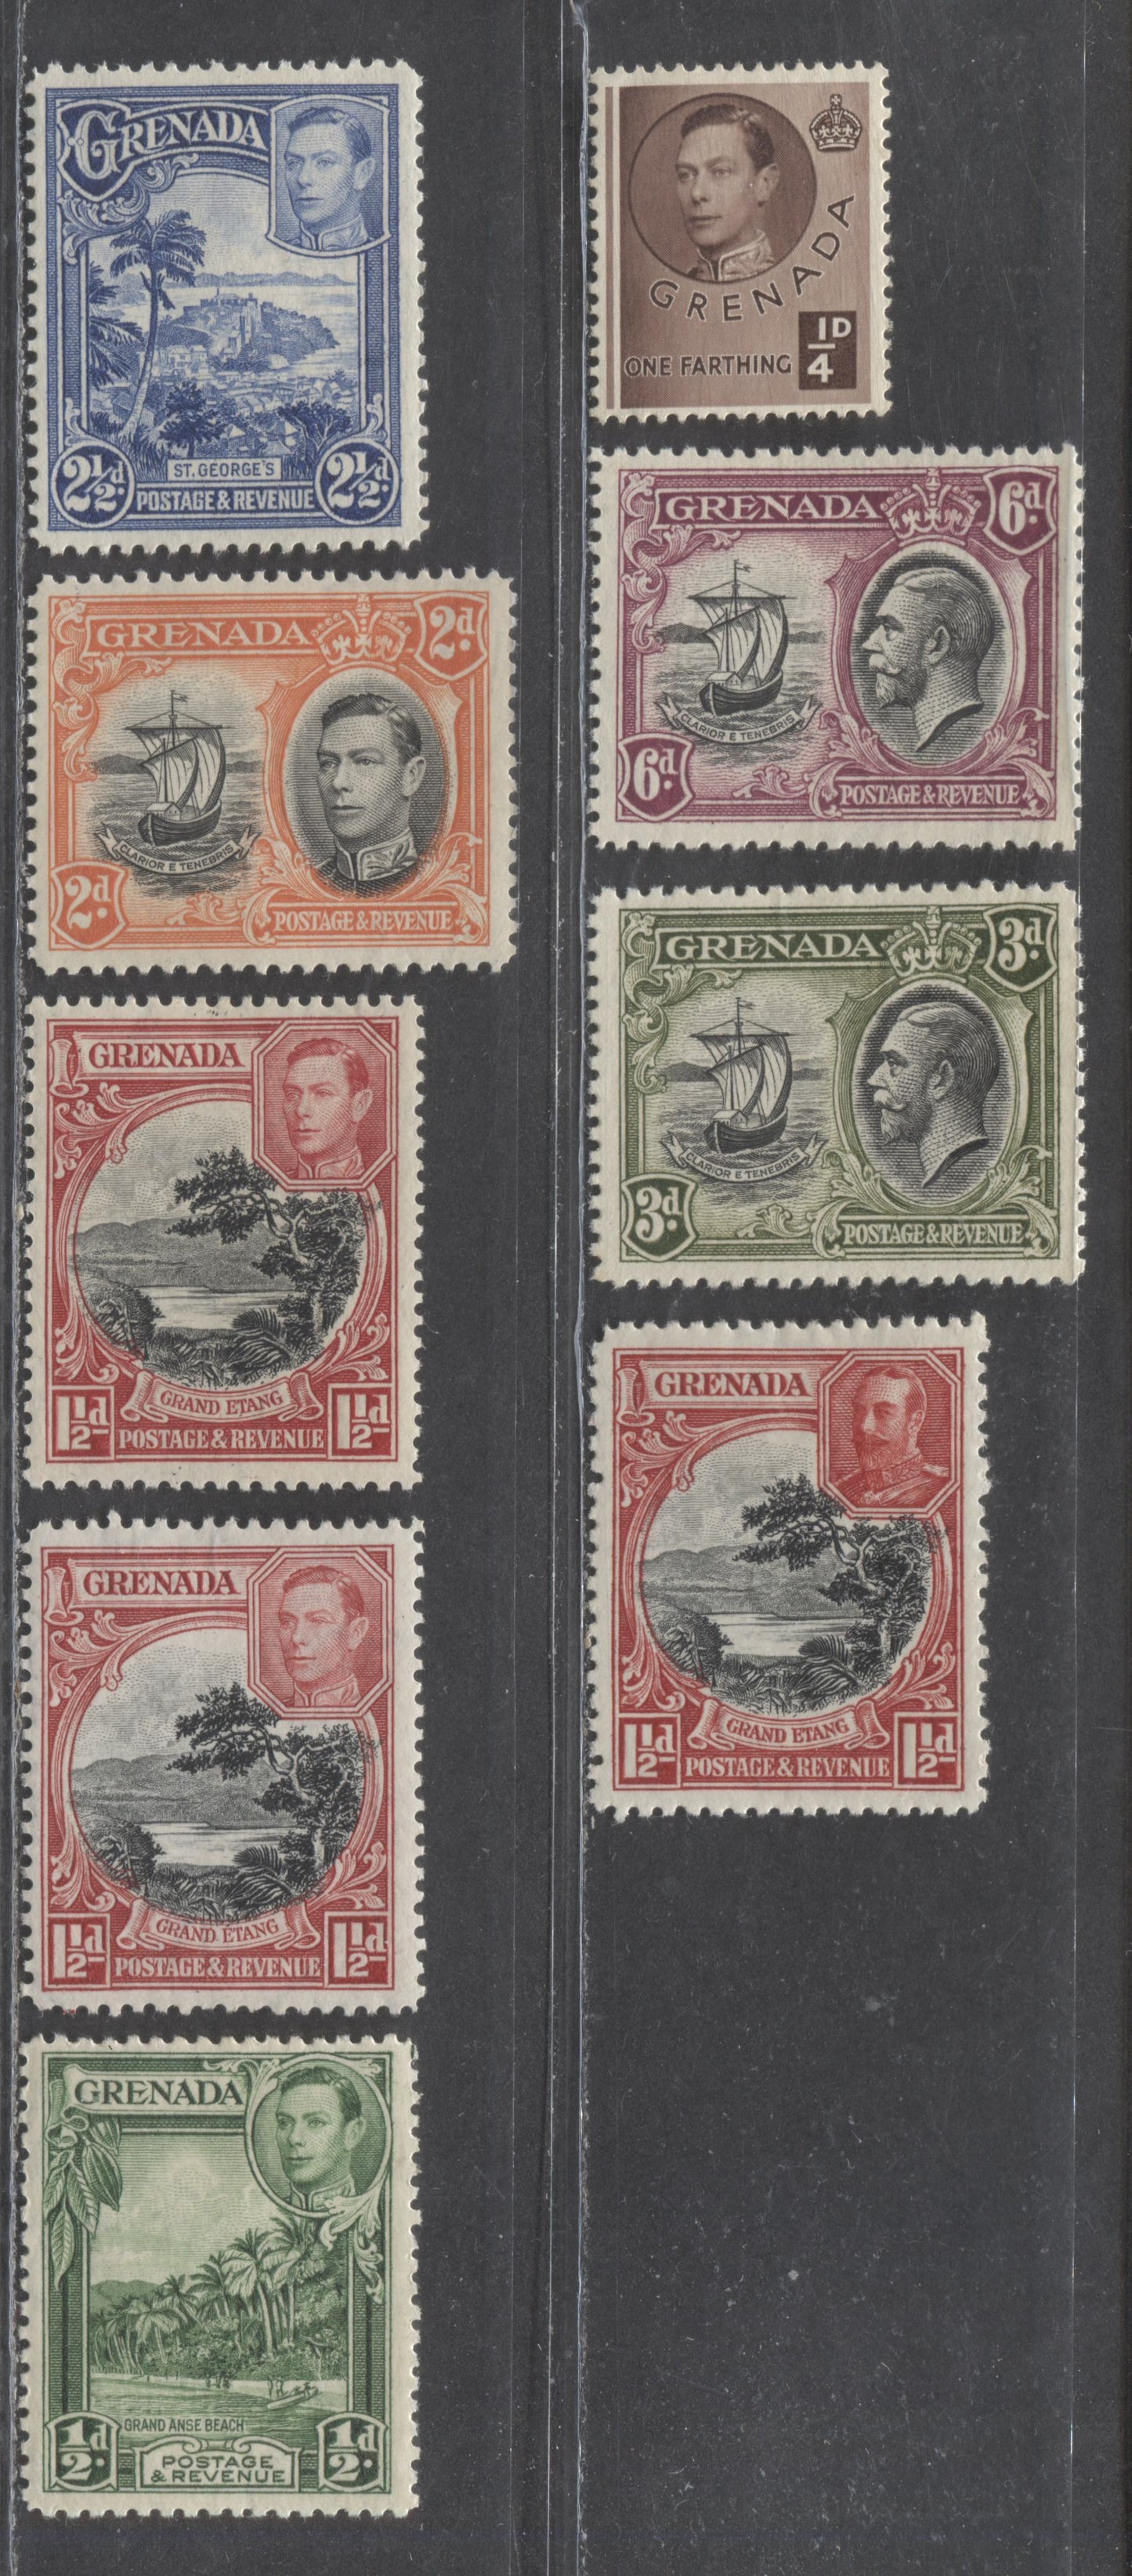 Lot 304 Grenada SC#116a/136 1934-1938 Definitives, 9 VFOG Singles, Click on Listing to See ALL Pictures, 2022 Scott Classic Cat. $20.65 USD